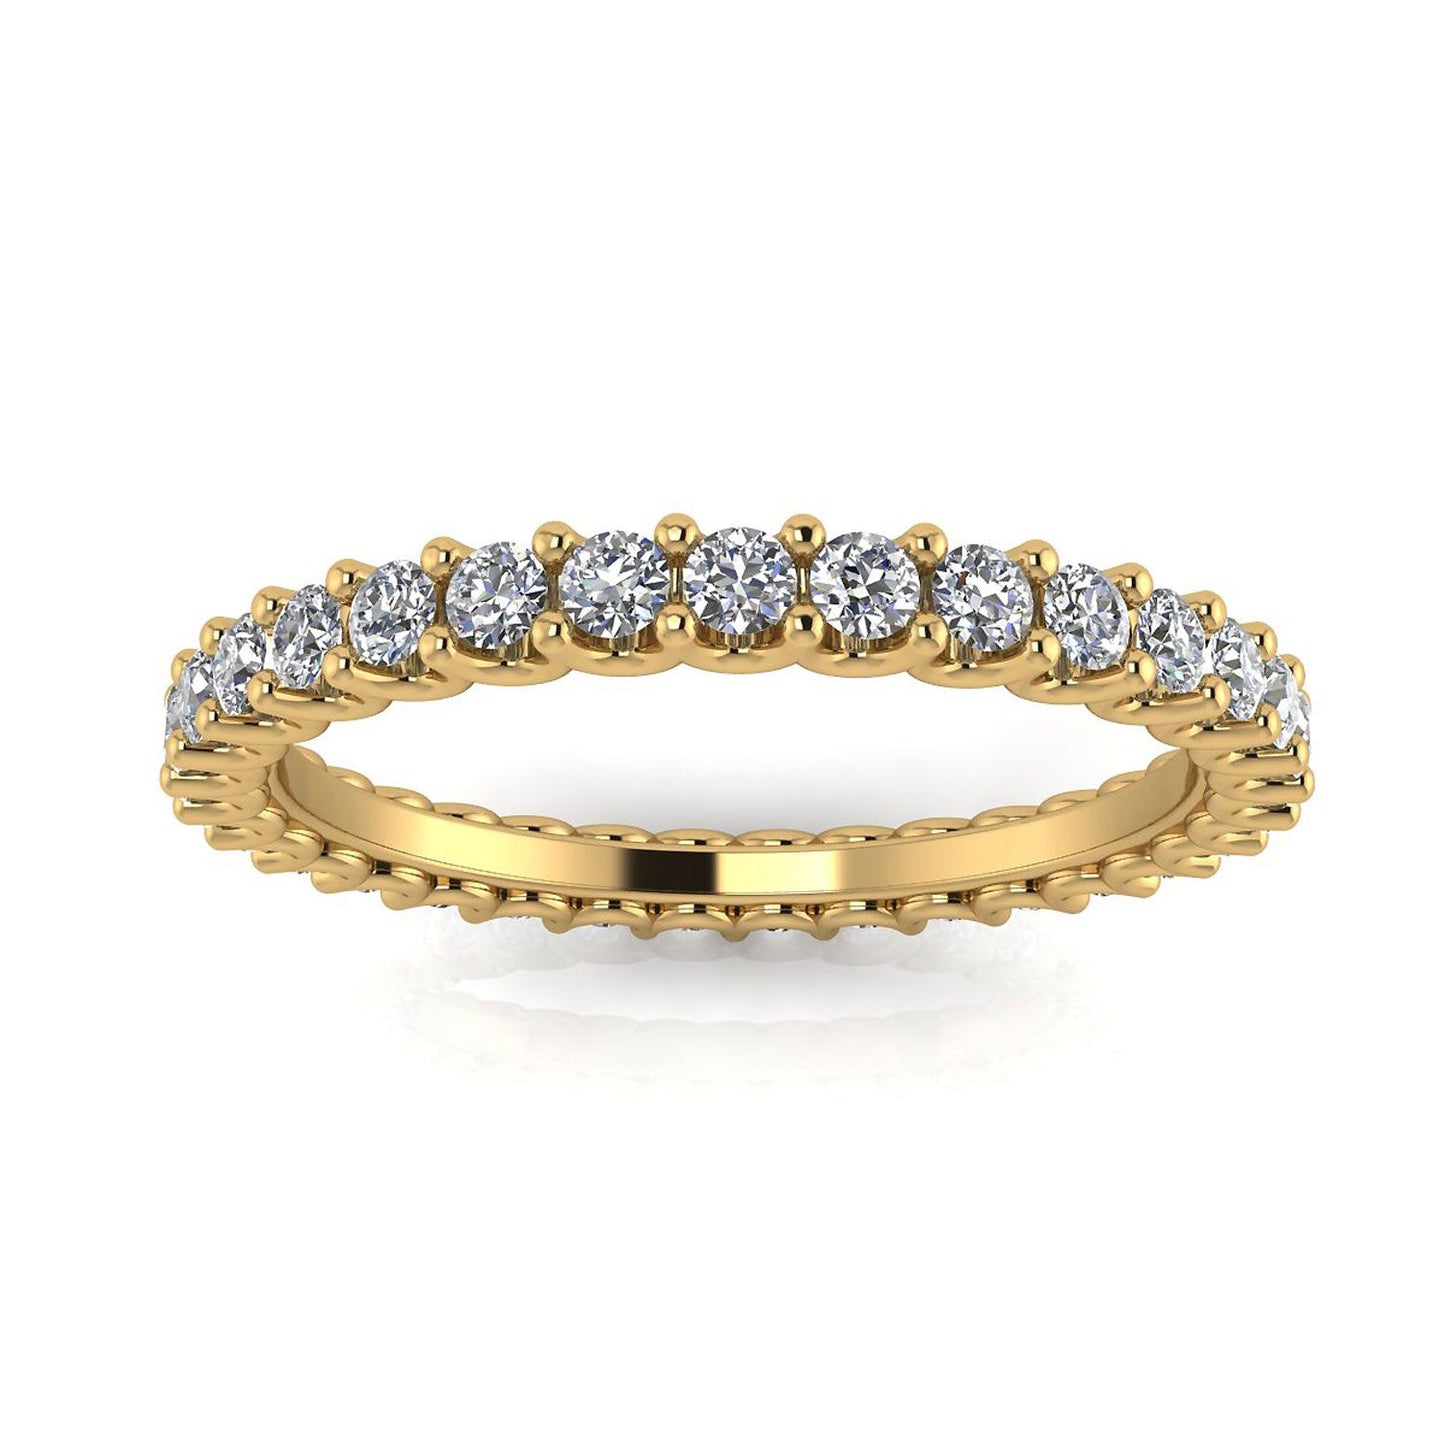 Round Brilliant Cut Diamond Shared Prong Set Eternity Ring In 14k Yellow Gold  (1.49ct. Tw.) Ring Size 6